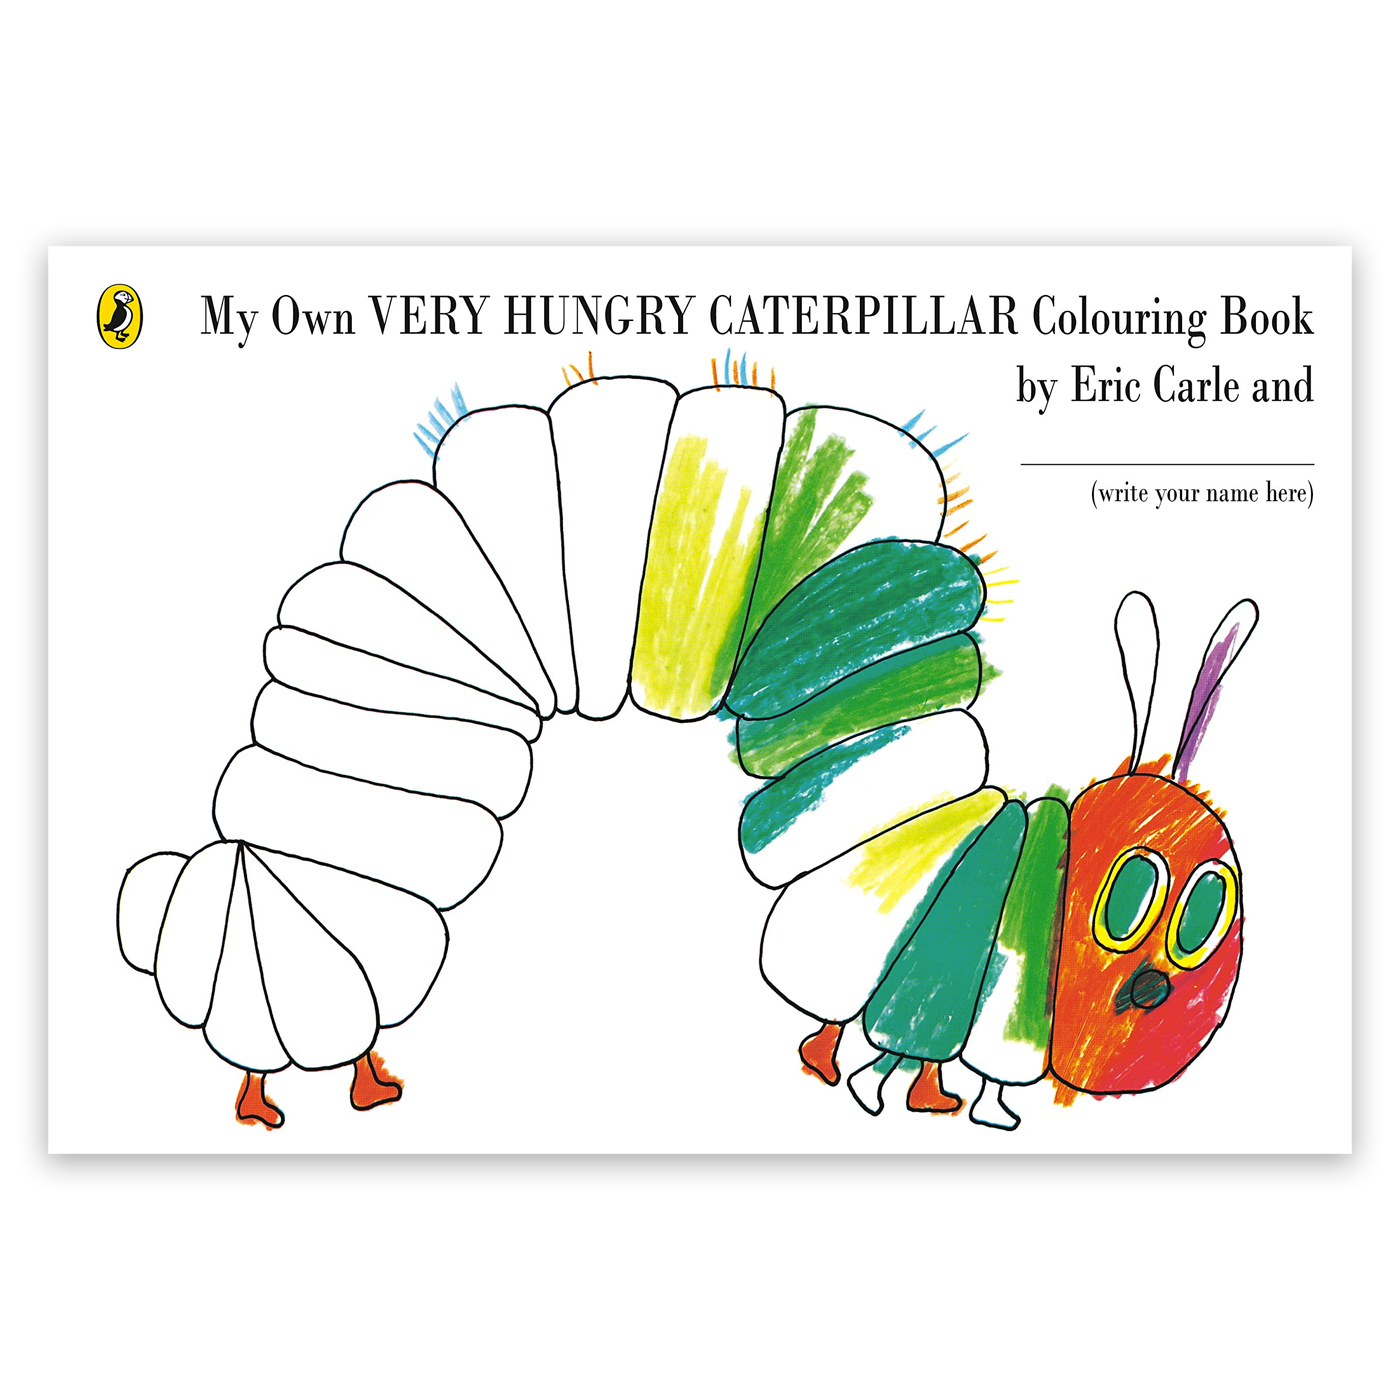  My Own Very Hungry Caterpillar Colouring Book